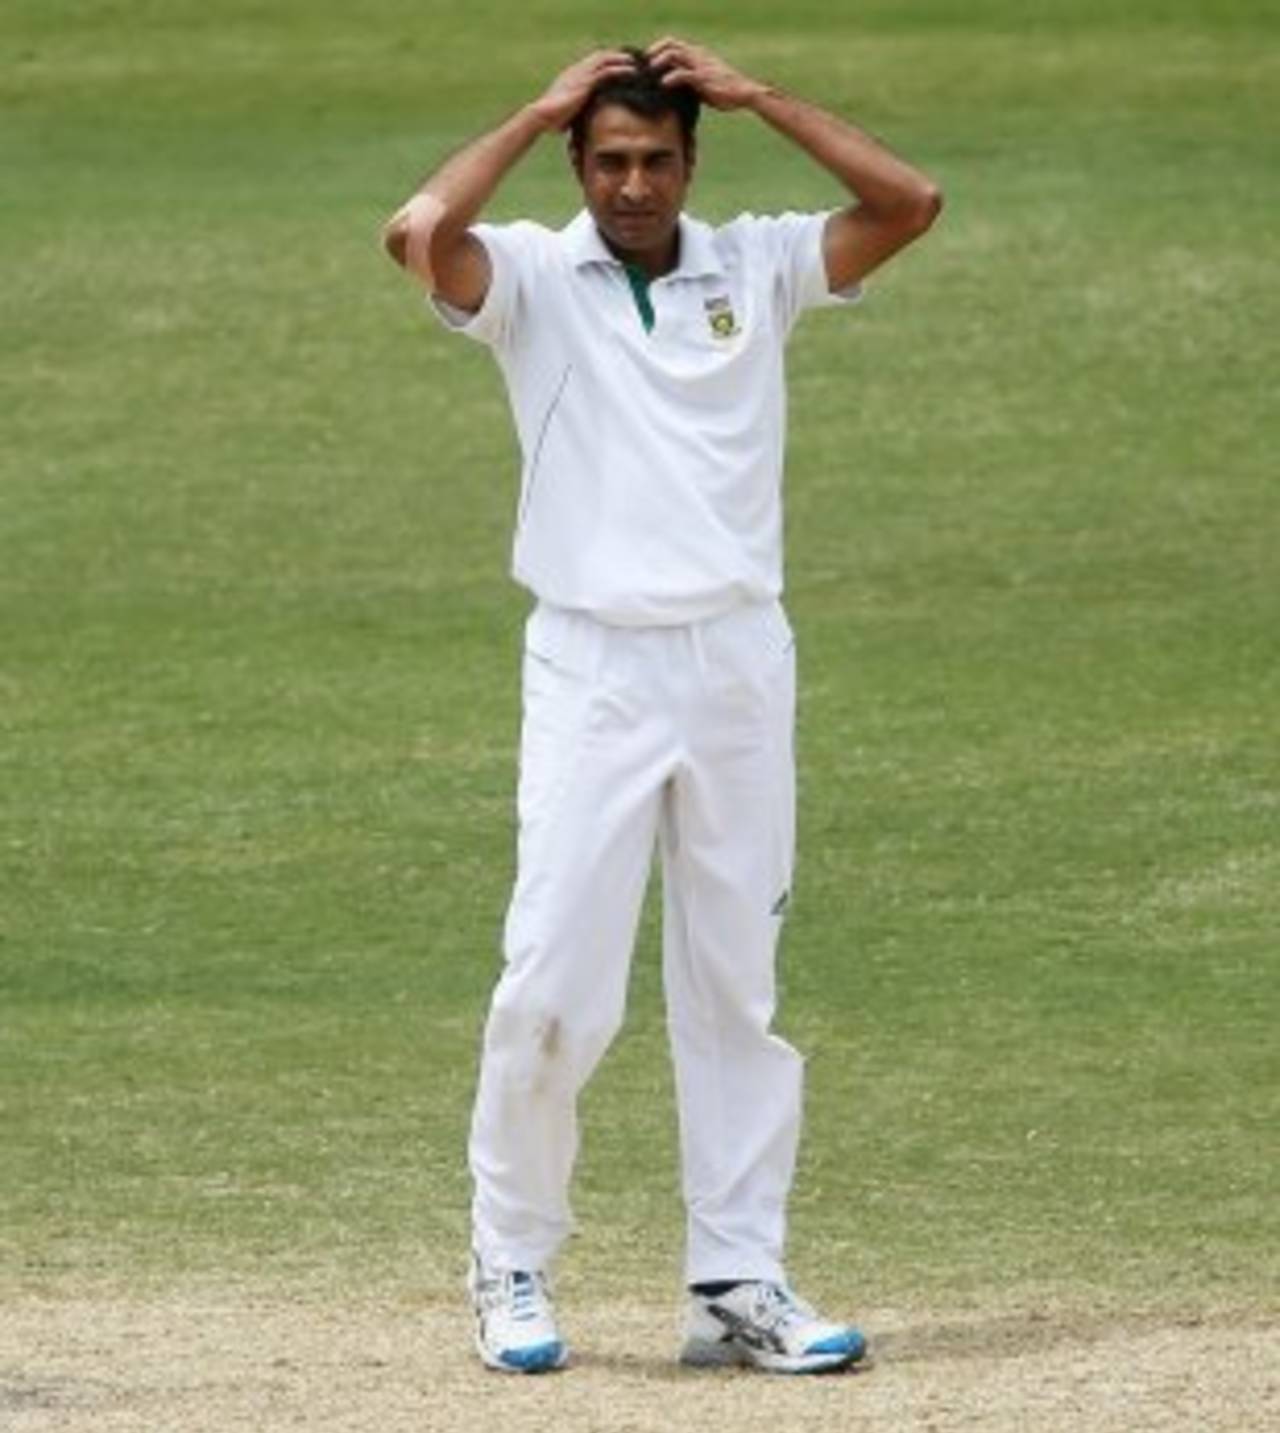 Imran Tahir had match figures of 0 for 260 in 37 overs, Australia v South Africa, 2nd Test, Adelaide, 4th day, November 25, 2012